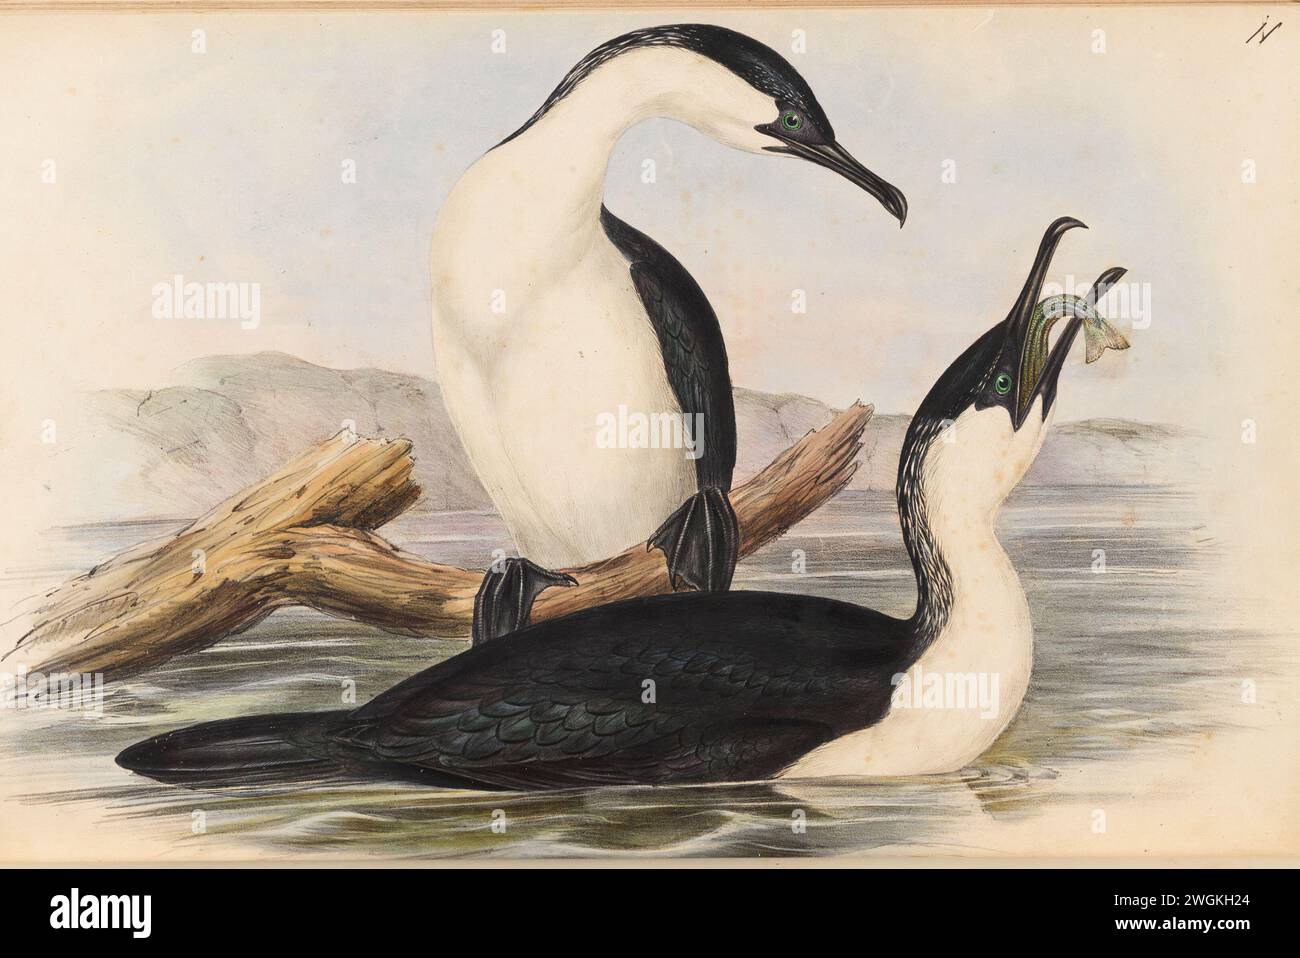 White-breasted Cormorant (Phalacrocorax leucogaster).  Plate from the Book Birds of Australia from John Gould, with illustration by his wife Elizabeth Gould, and from her drawings after her passing.   Published in eight volumes (including supplements) from 1840 to 1869 Stock Photo